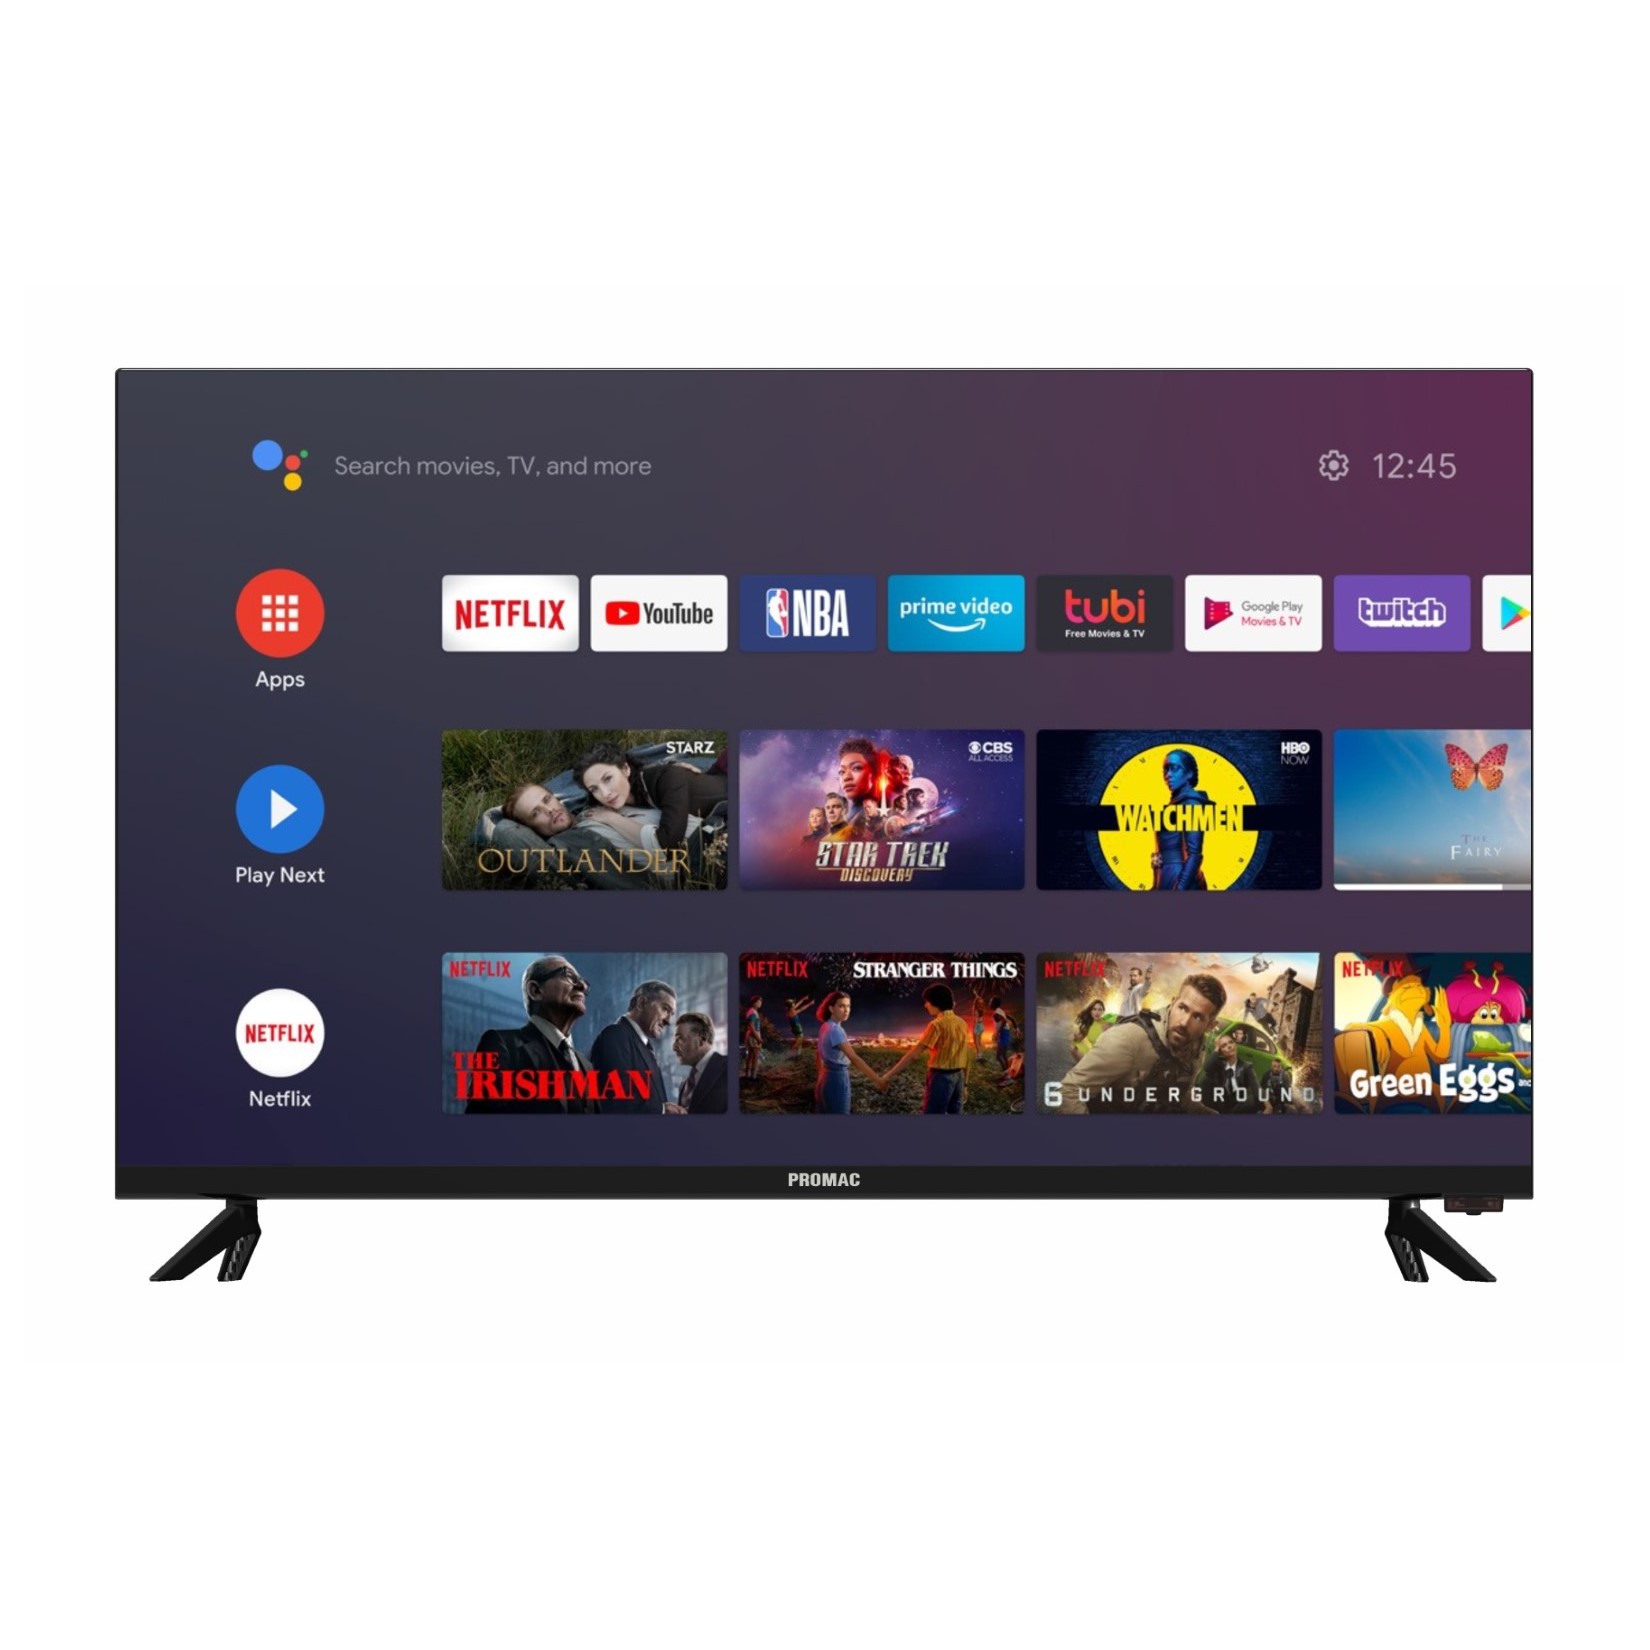 PROMAC] LED-HA3200D ; 32” Certified Android TV - Alson's Trading